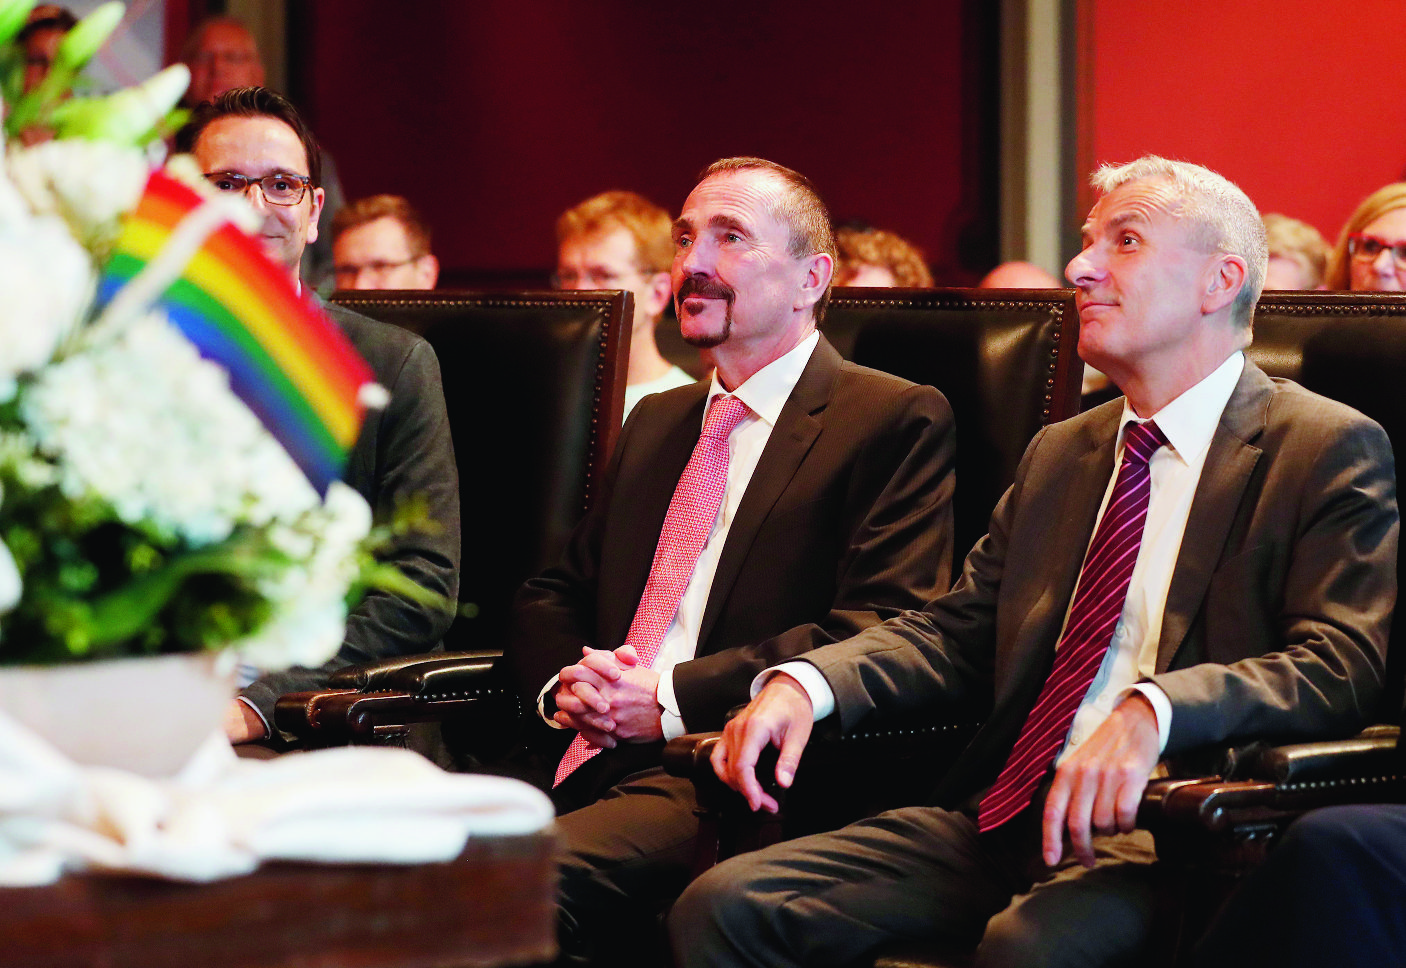 epa06237647 Karl Kreile (L) and Bodo Mende (R) listen to the registry officer during the first civil wedding ceremony between two men in Berlin, Germany, 01 October 2017. The same sex marriage law that was approved by the German Parliament in June becomes effective from the 01 October 2017. Till now gay and lesbian couples could only register partnerships, the same sex marriage law allow them to adopt children and equals their rights to those of heterosexual couples.  EPA/FELIPE TRUEBA GERMANY SAME SEX MARRIAGE